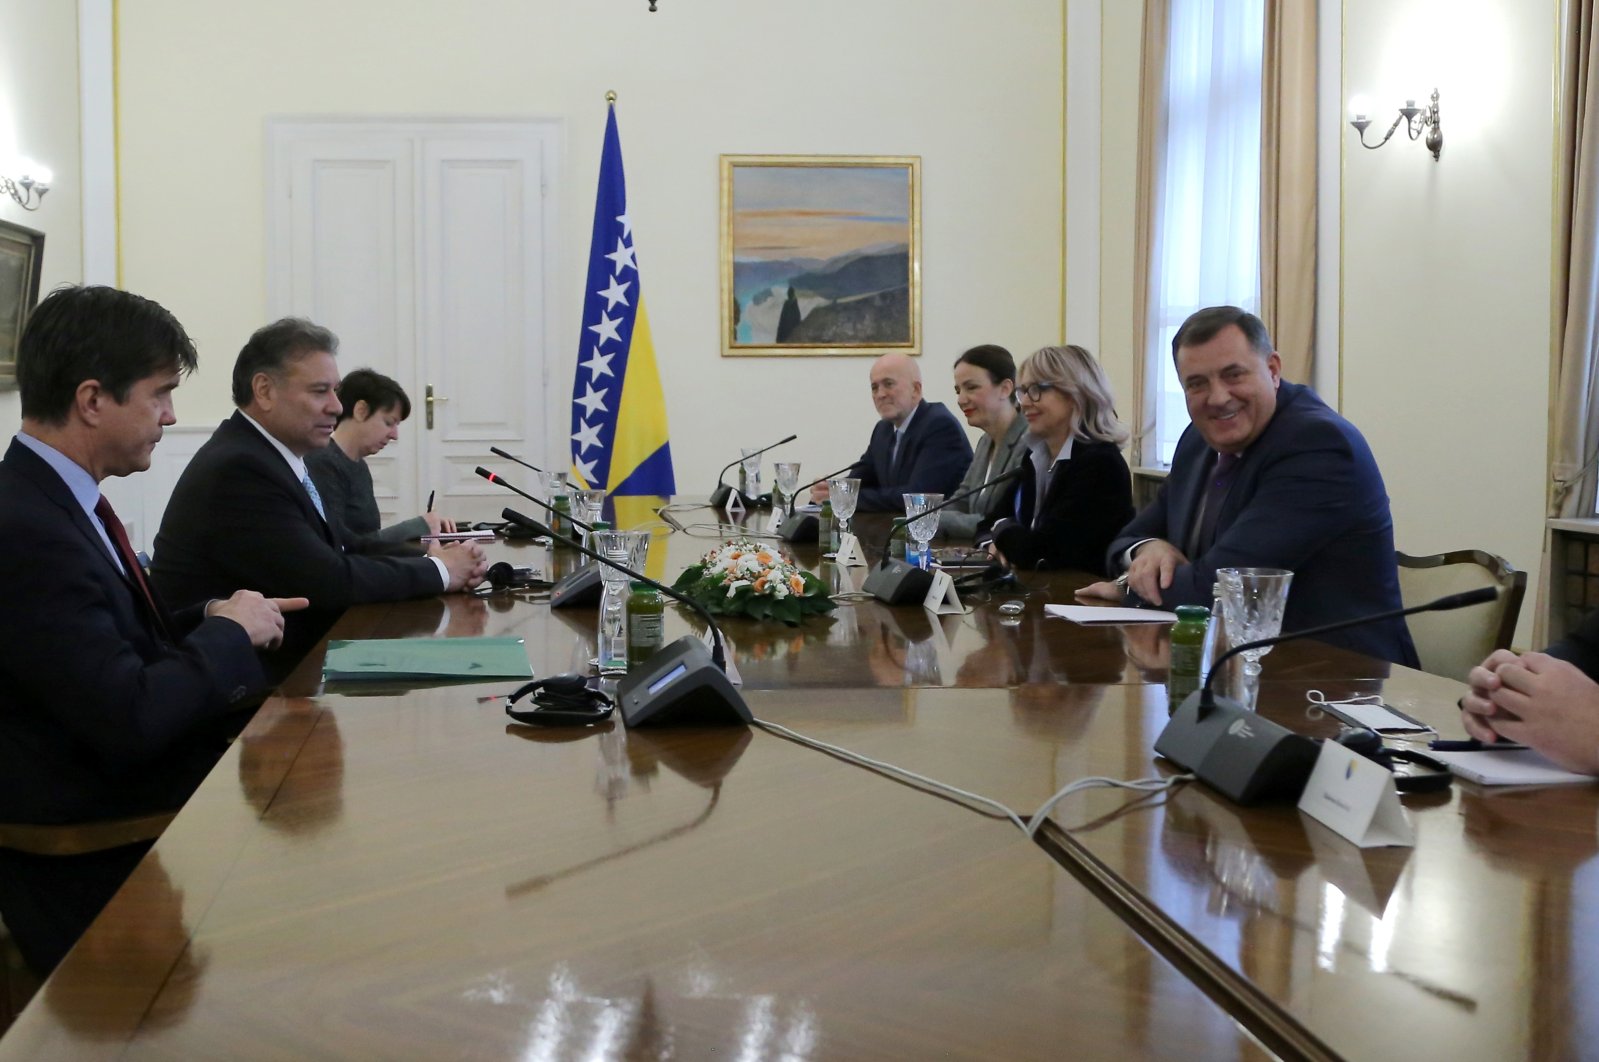 United States deputy assistant secretary in charge of the Western Balkans, Gabriel Escobar (L), and Bosnian Serb member of the tripartite Presidency of Bosnia Milorad Dodik (R) attend a meeting in Sarajevo, Bosnia, Nov. 8, 2021. (Reuters Photo)